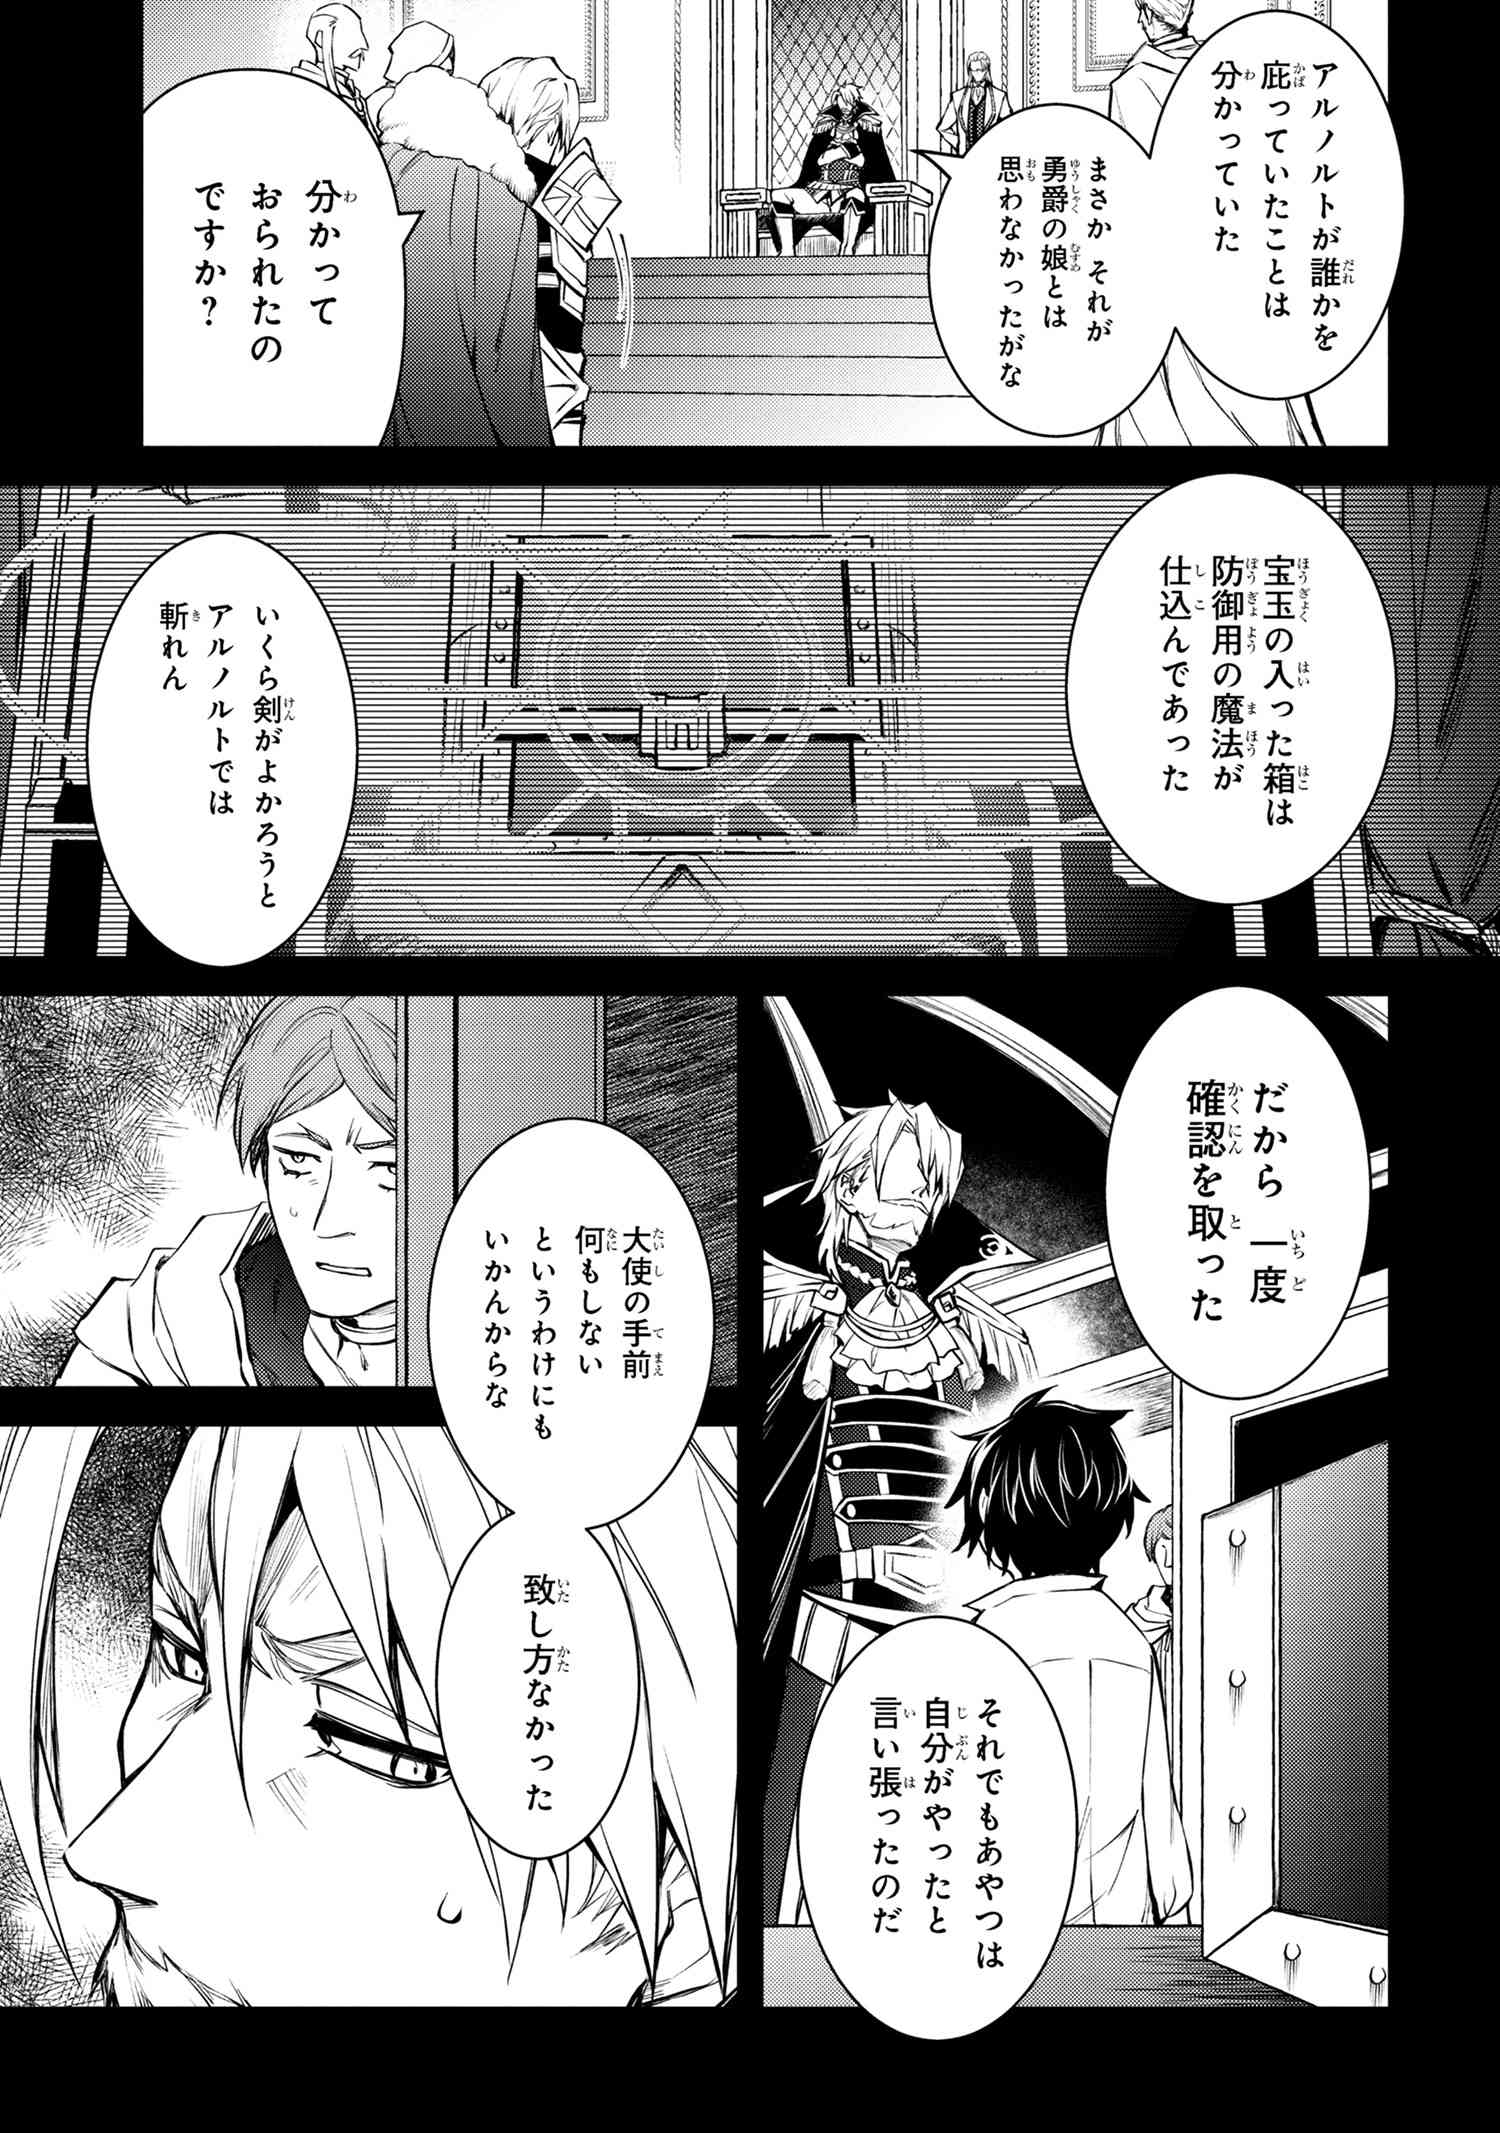 The Strongest Dull Prince’s Secret Battle for the Throne - Chapter 39.2 - Page 7